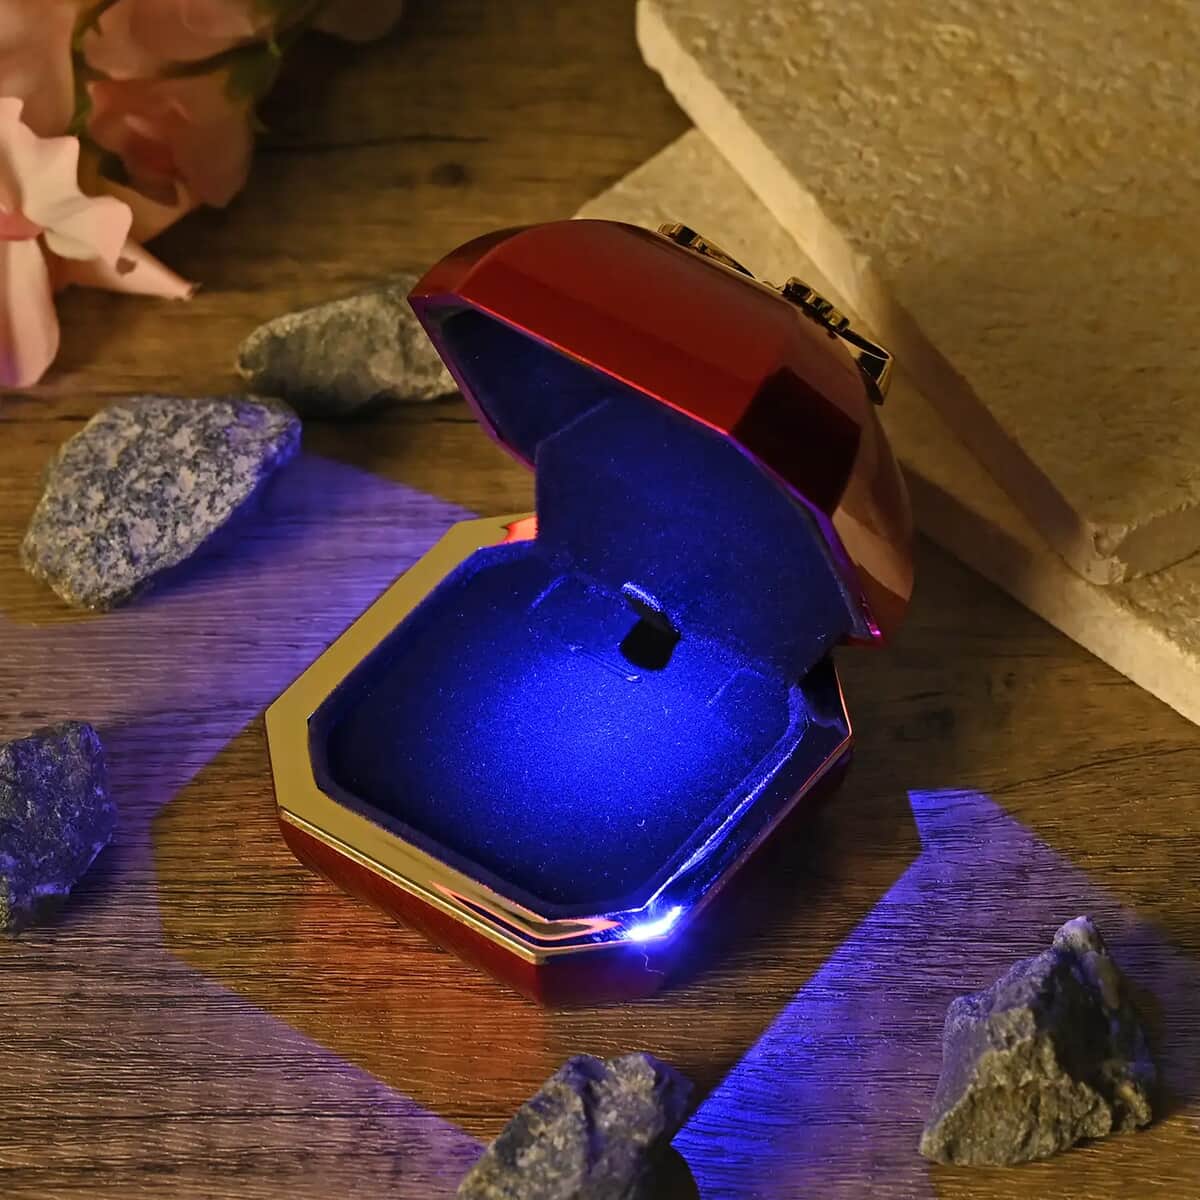 Red Solid Luxurious Polished Ring Jewelry Box with Led Light (2.8"x2.8"x2.4") image number 1